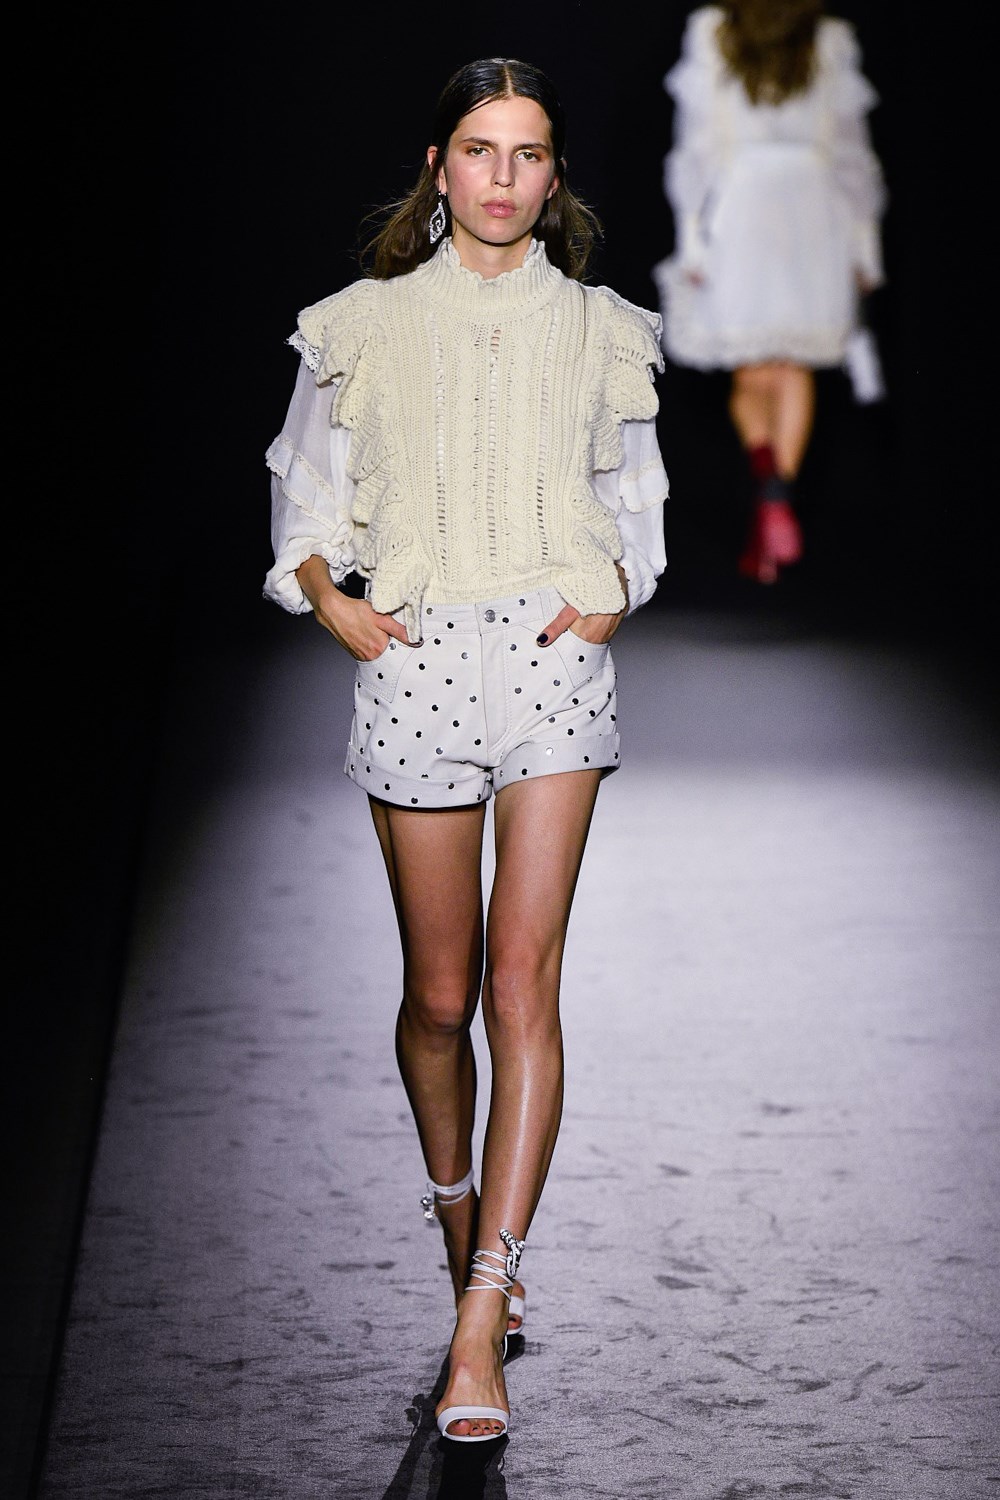 Short Shorts Spring 2020 Trend from Runway to Street | The Impression